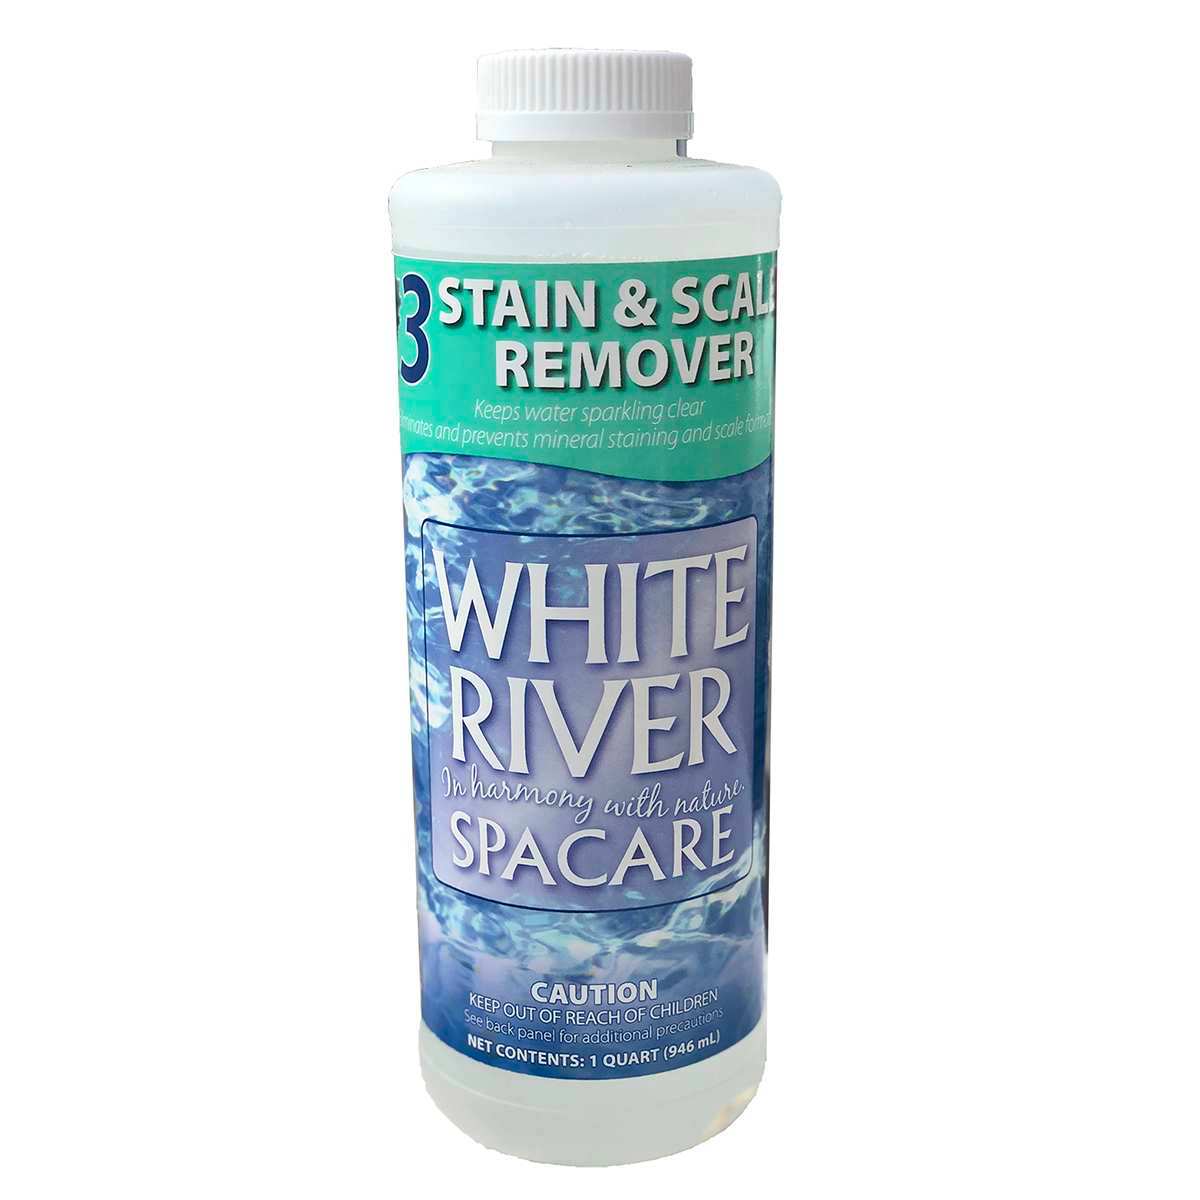 STAIN & SCALE #3 WHITE RIVER